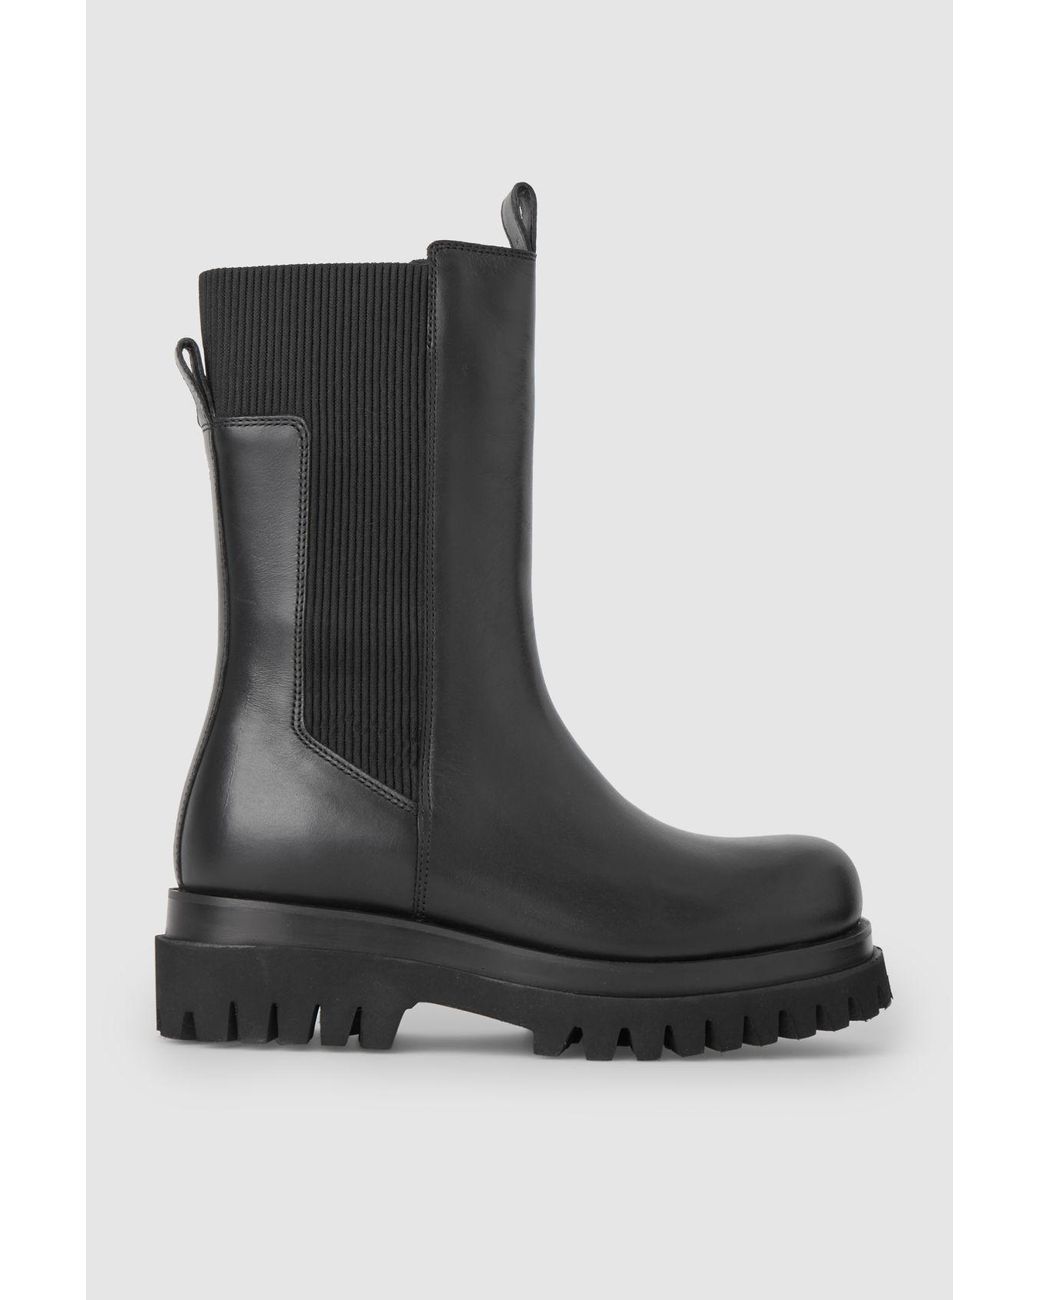 COS Chunky Leather Chelsea Boots in Black - Lyst